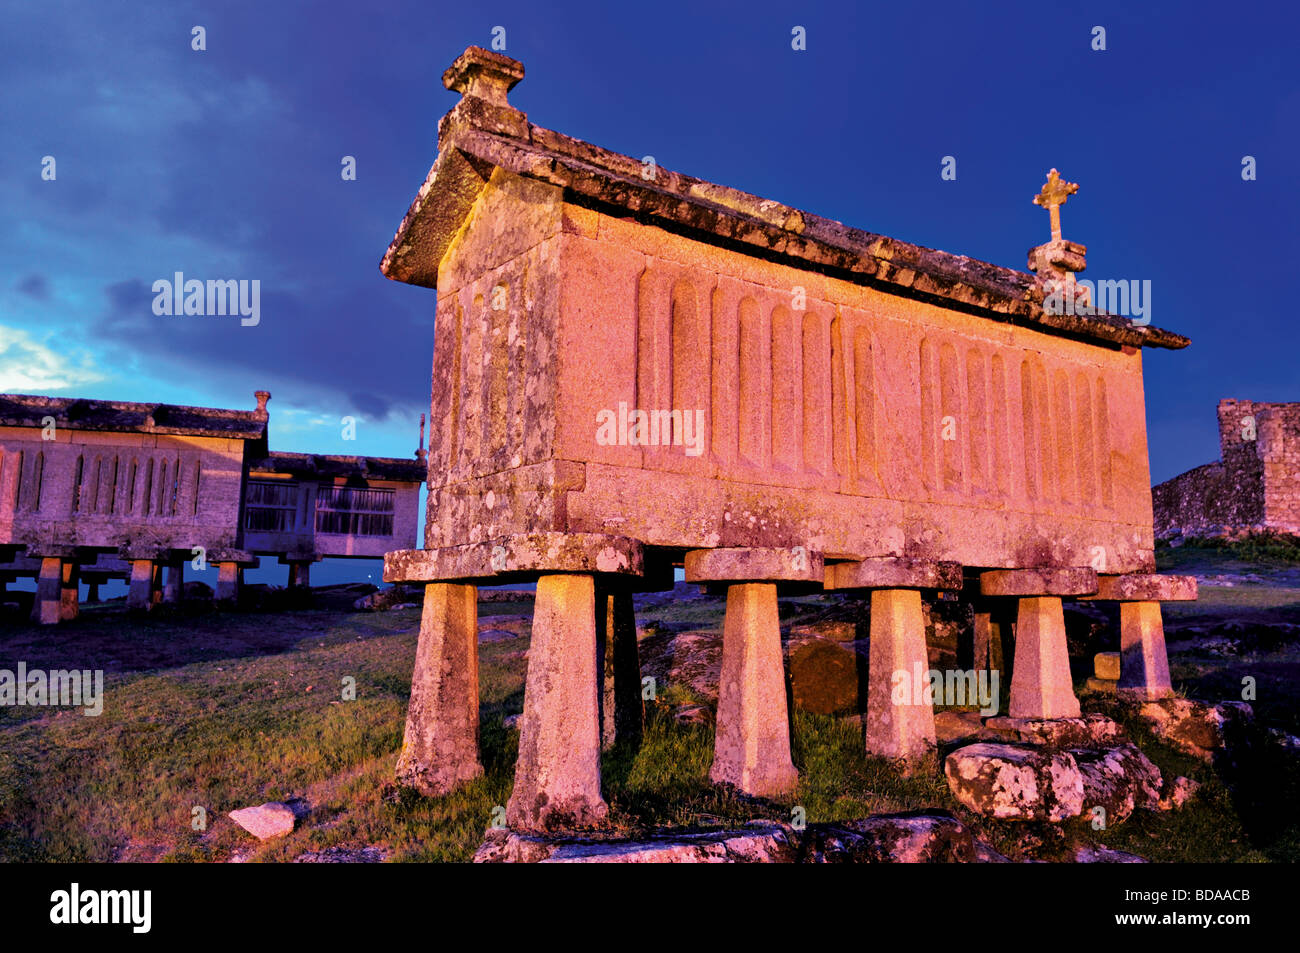 Portugal, Minho: Nocturnal view of traditional corn storehouses in Lindoso Stock Photo